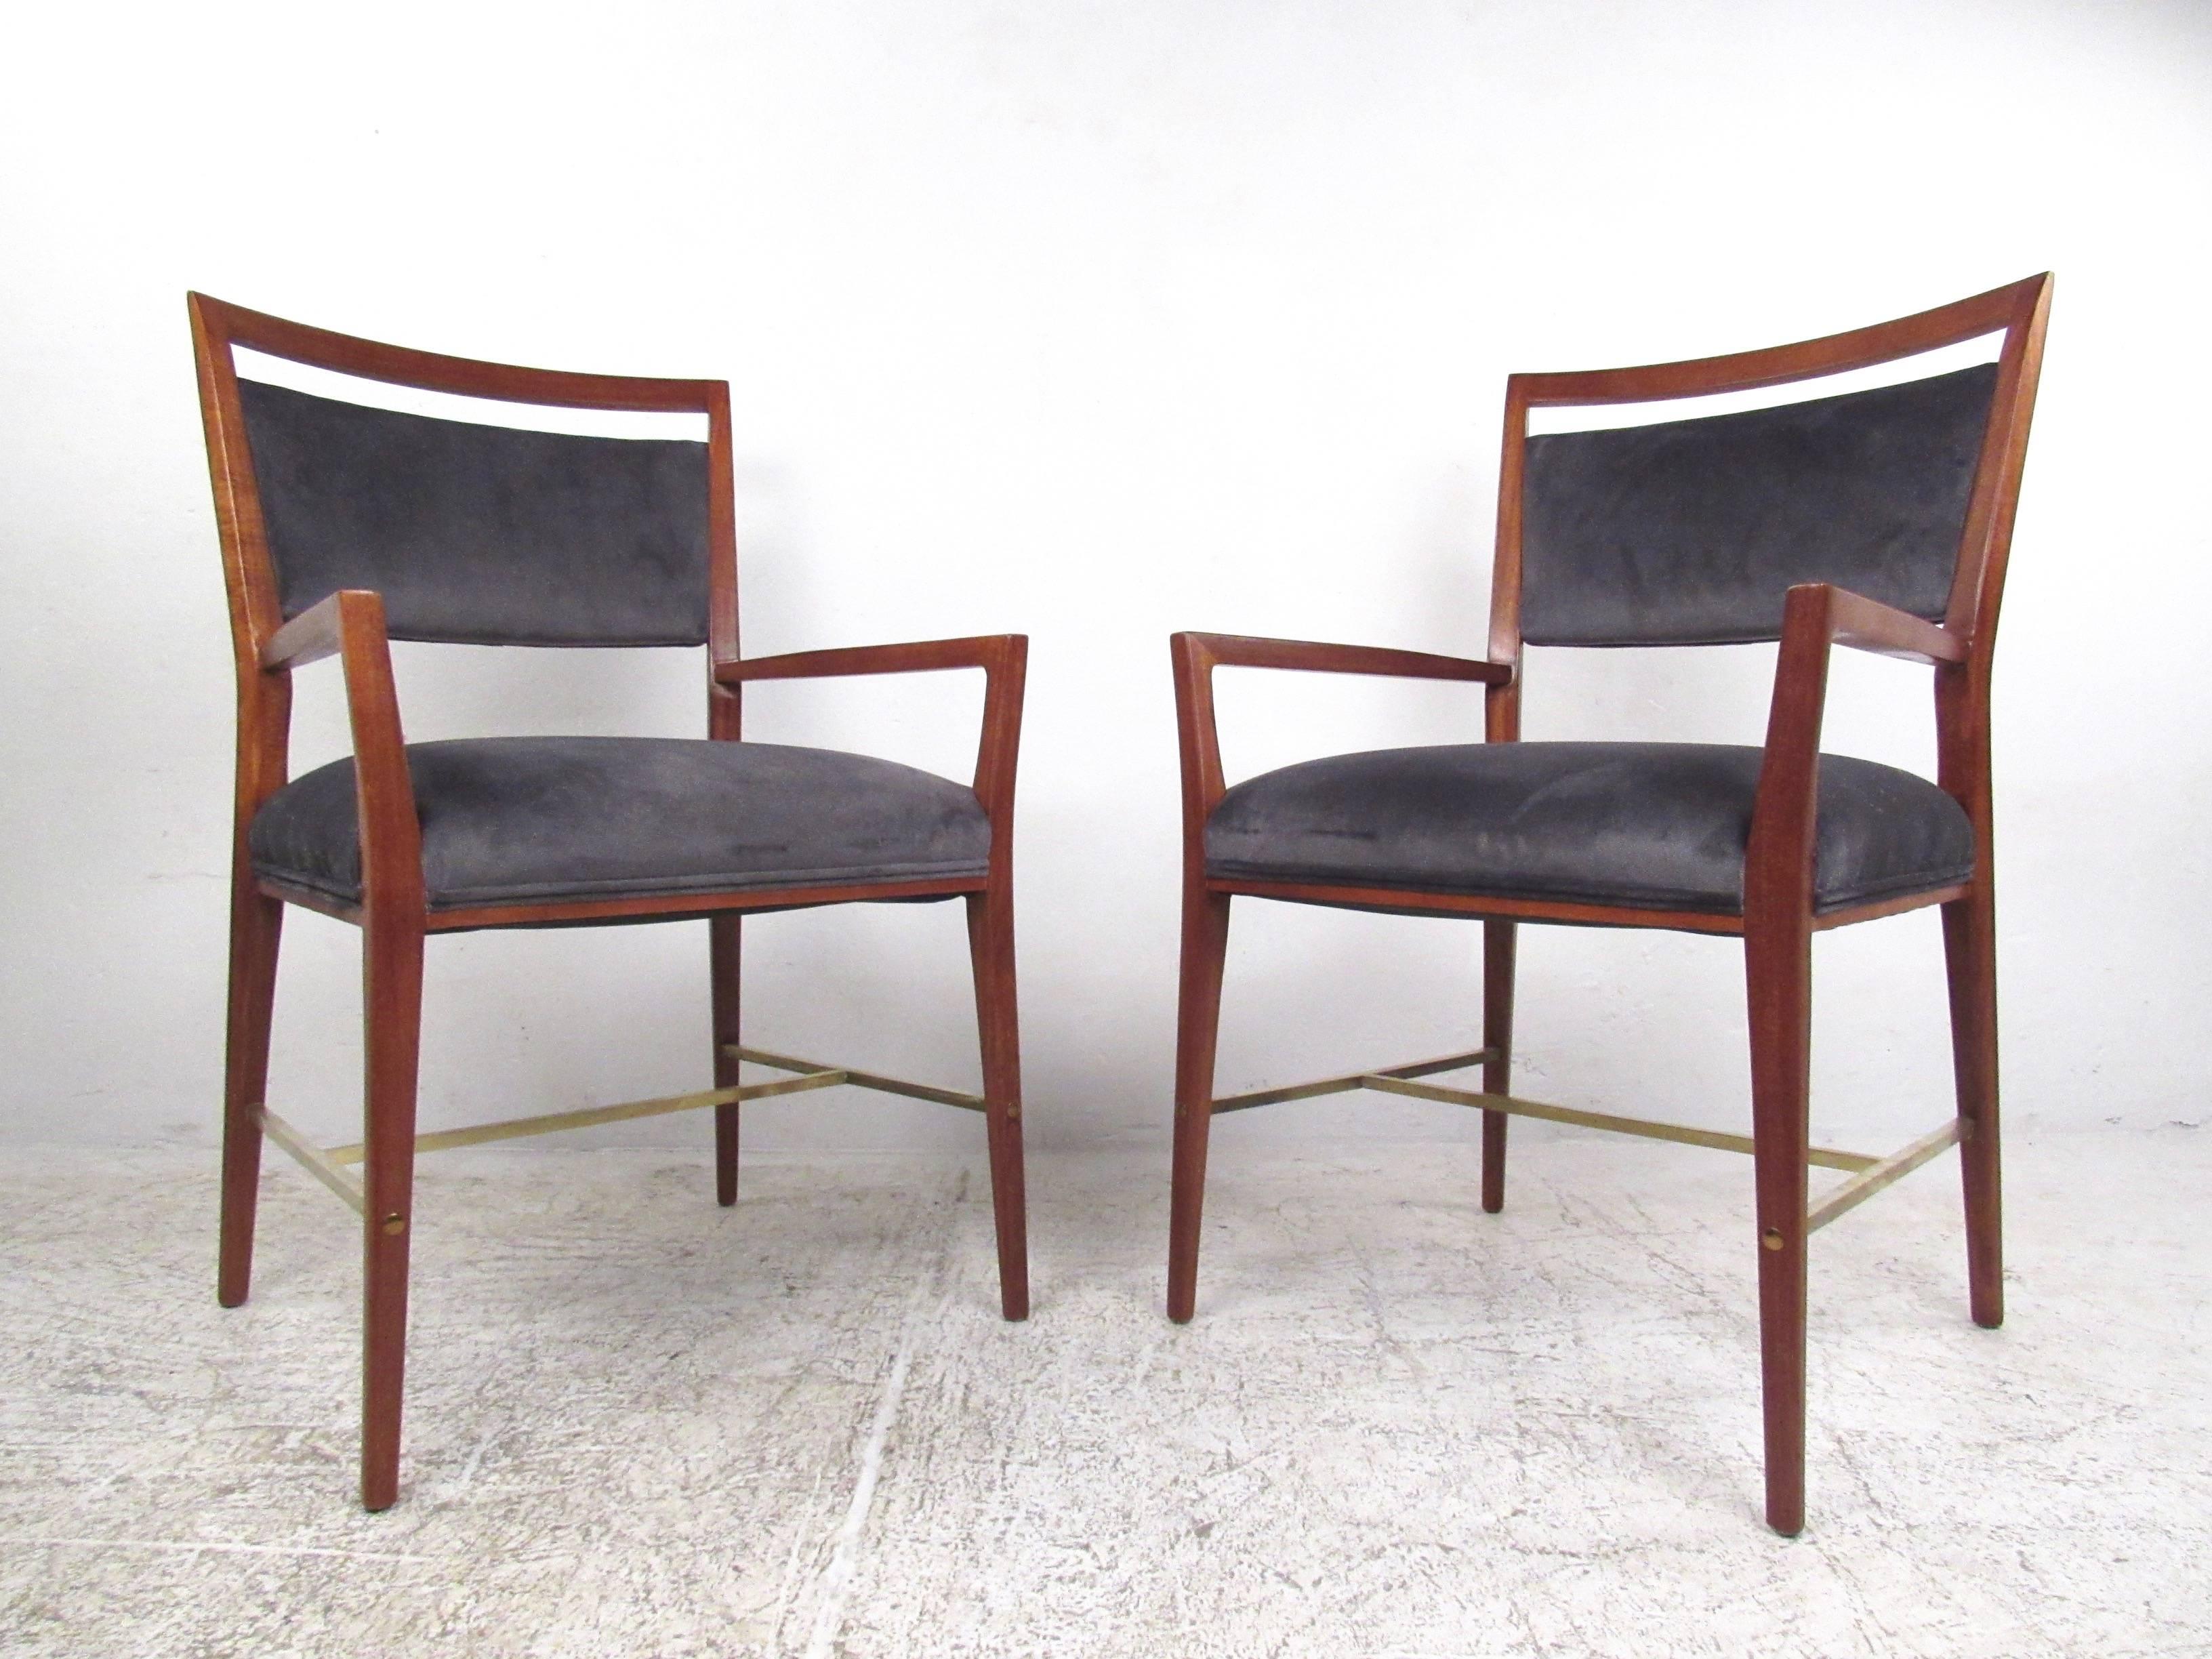 These stunning vintage chairs feature uniquely tapered hardwood frames, brass stretchers, and comfortable upholstered seats and backs. This Classic mix of comfort and Mid-Century style makes these Paul McCobb armchairs an impressive addition to any